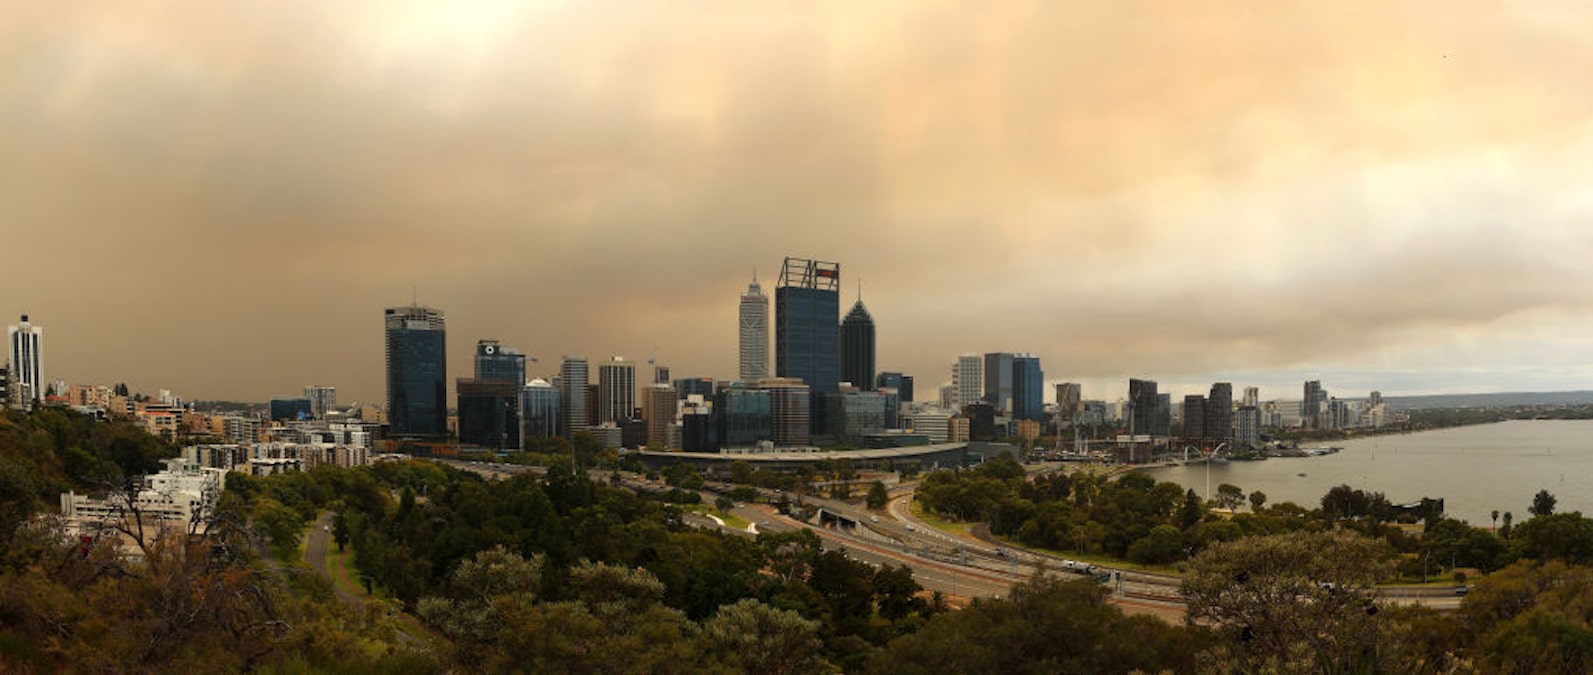 Smoke from wildfires in Perth, Australia